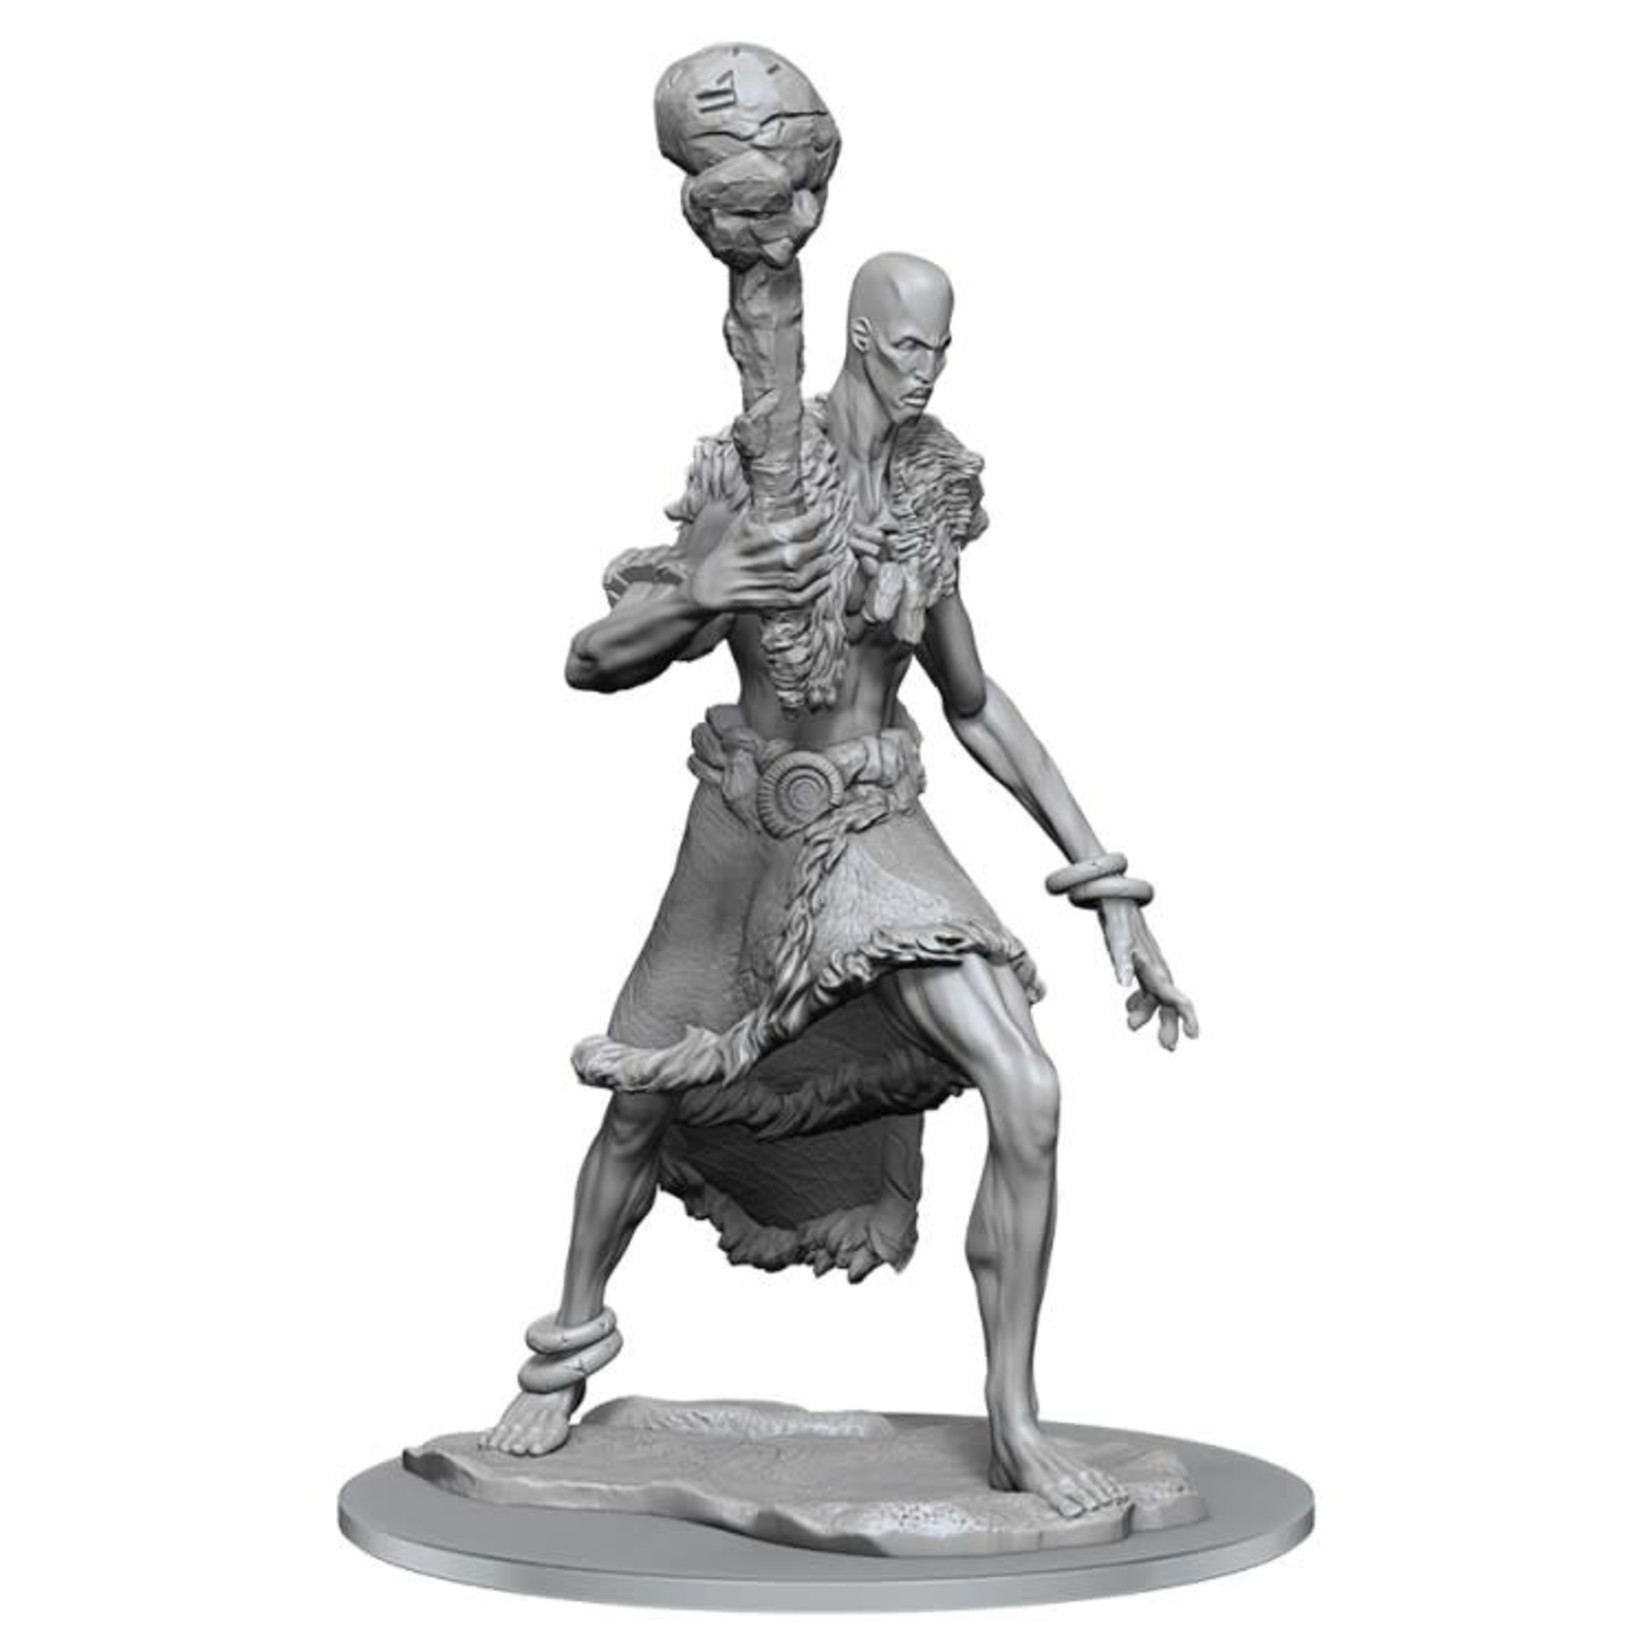 WizKids Dungeons and Dragons Nolzur's Marvelous Minis Stone Giant